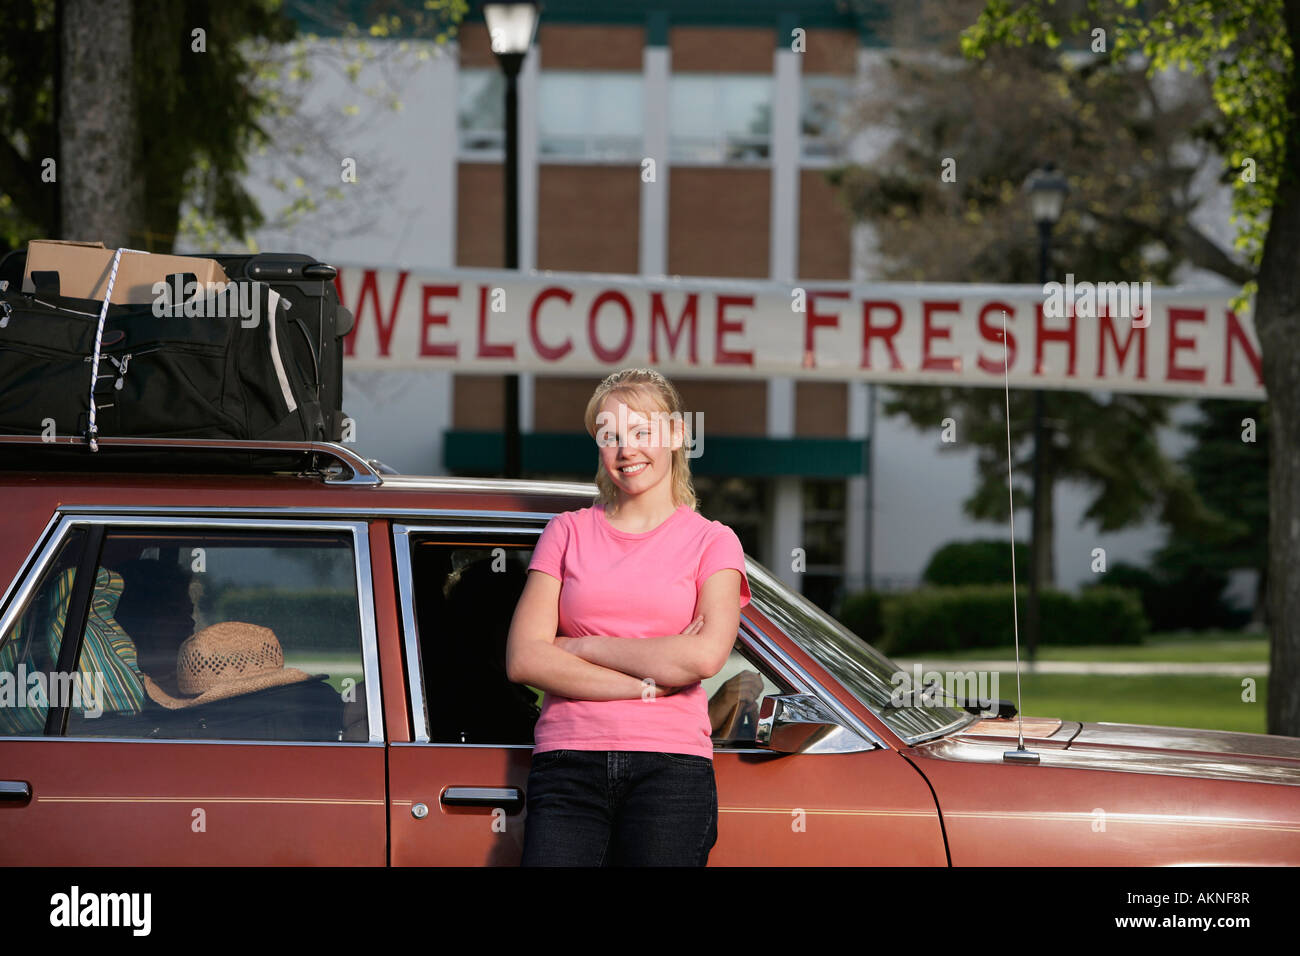 A woman arriving at college Stock Photo